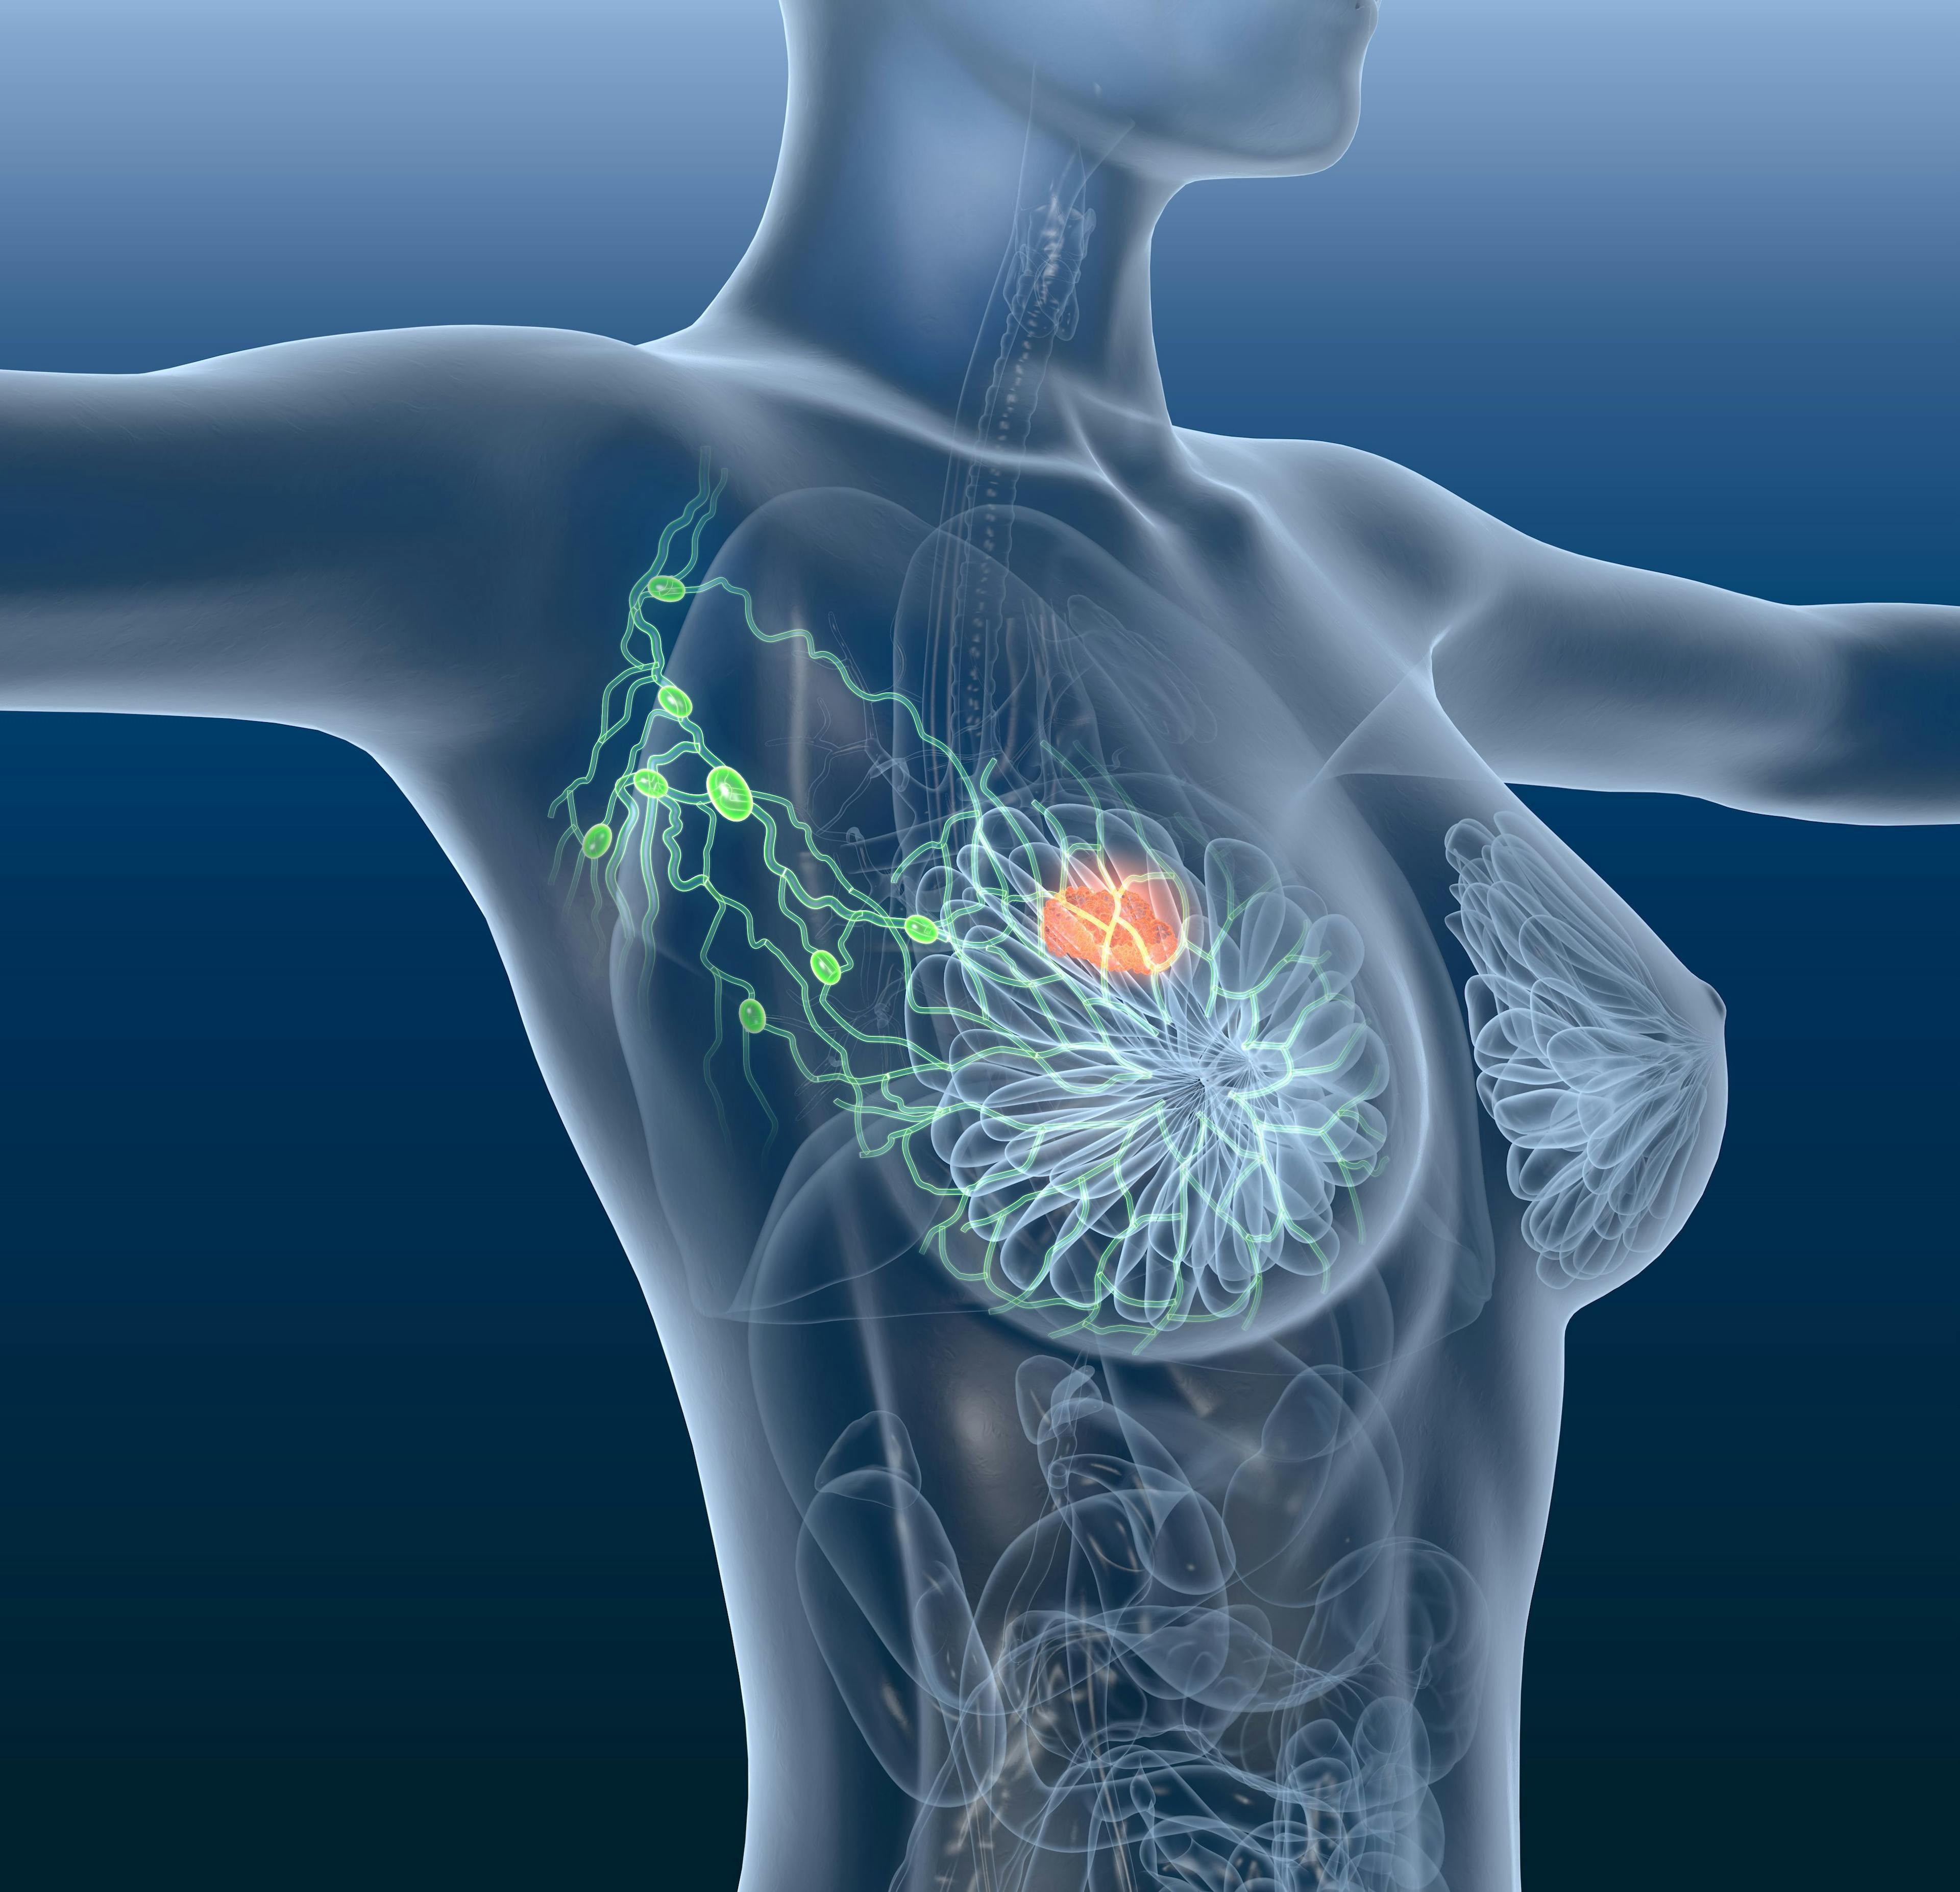 Research suggests a new HER2DX assay is potentially able to accurately predict risk of recurrence for patients with early-stage HER2-positive breast cancer.